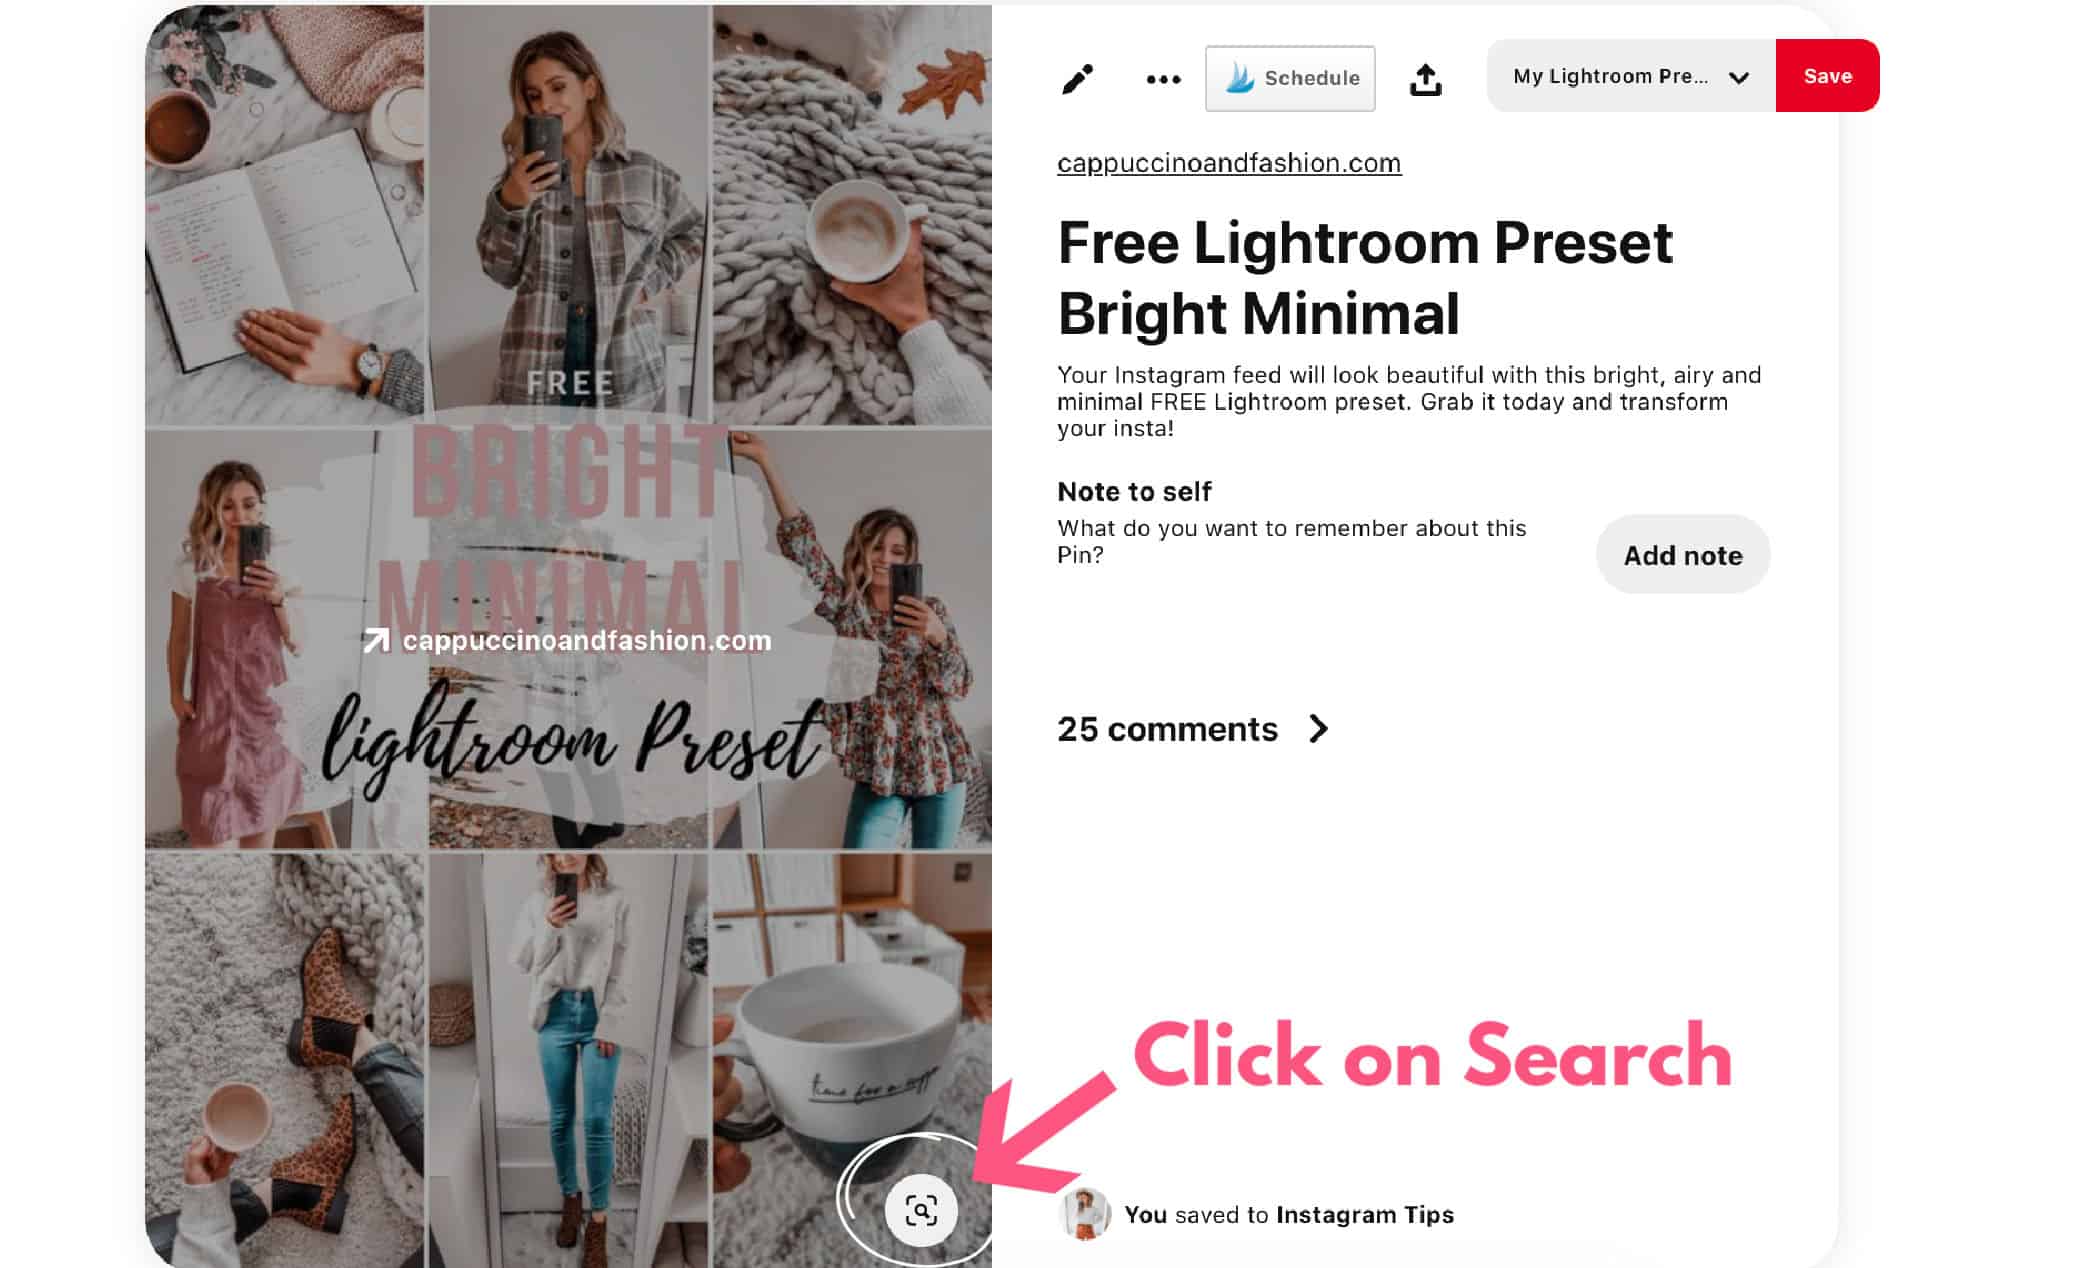 How to find your stolen pins on Pinterest